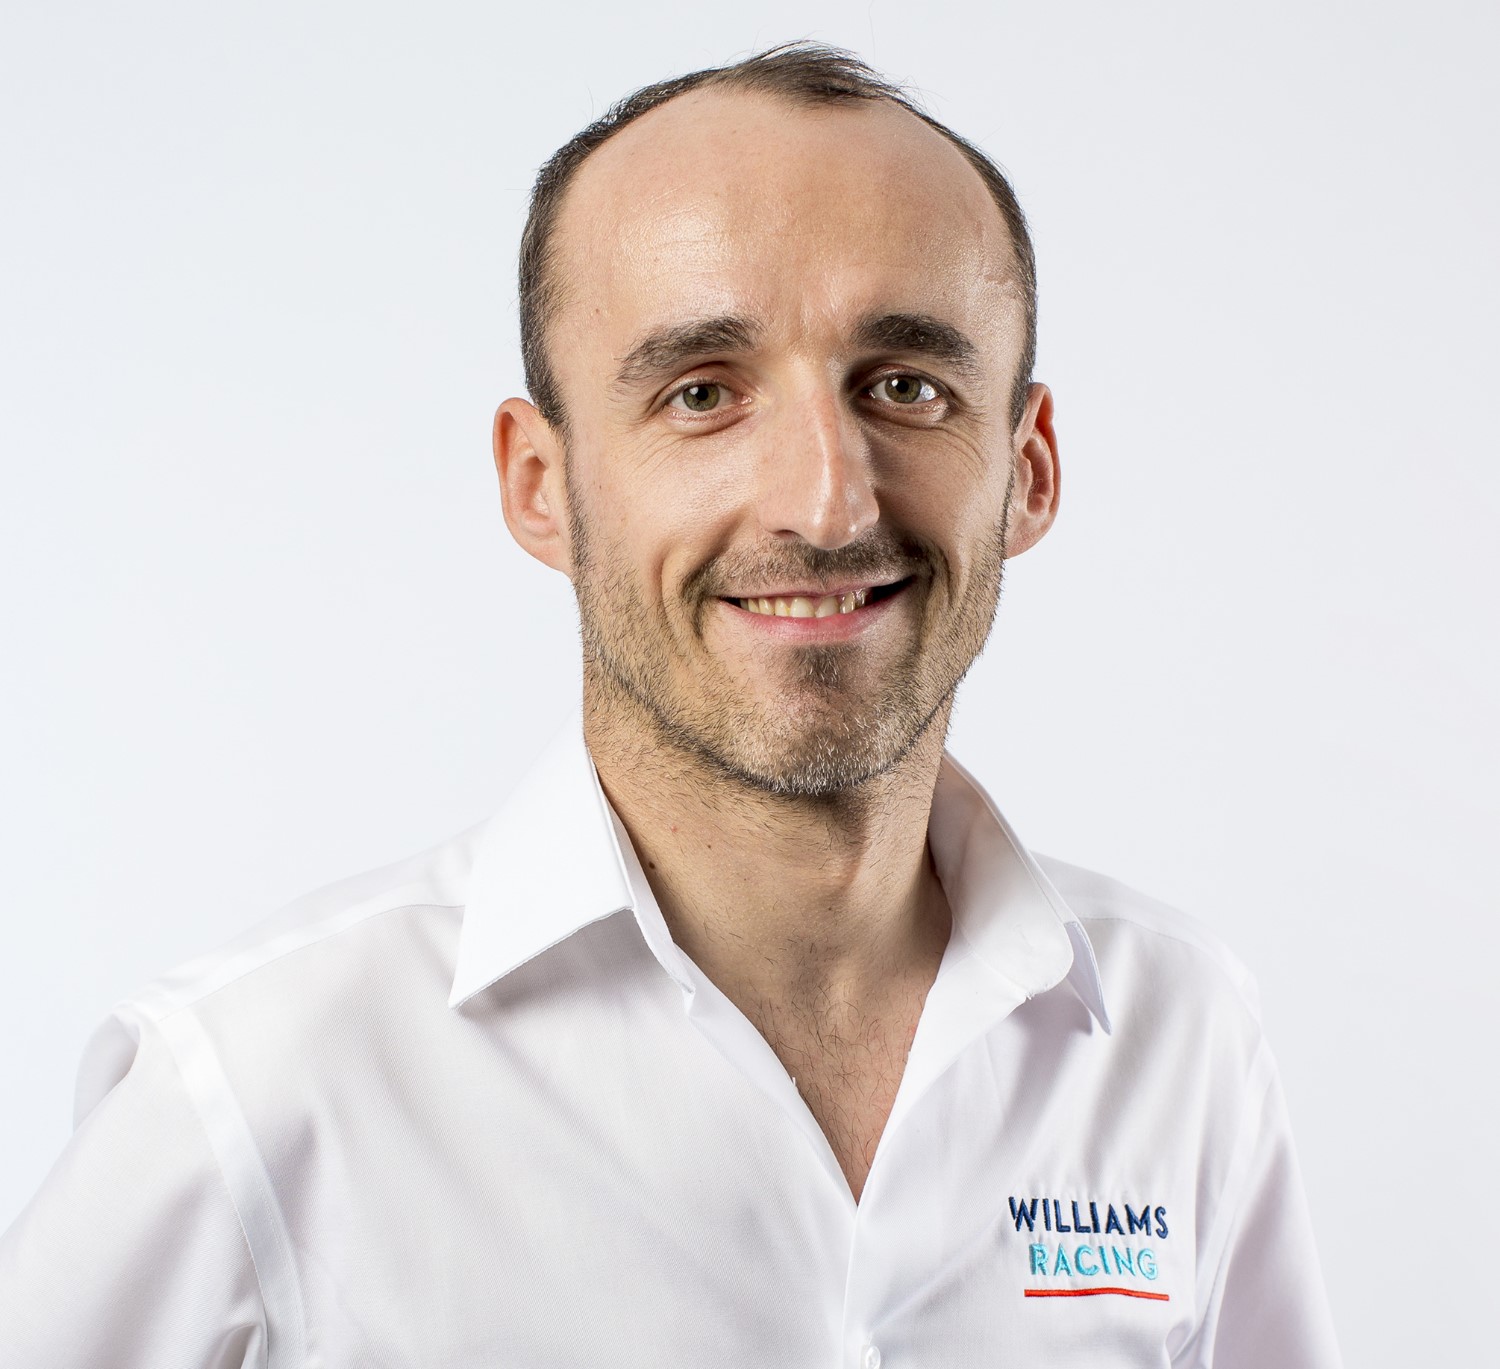 Robert Kubica will never race an F1 car again. Track clean on Friday mornings, yes, race no.